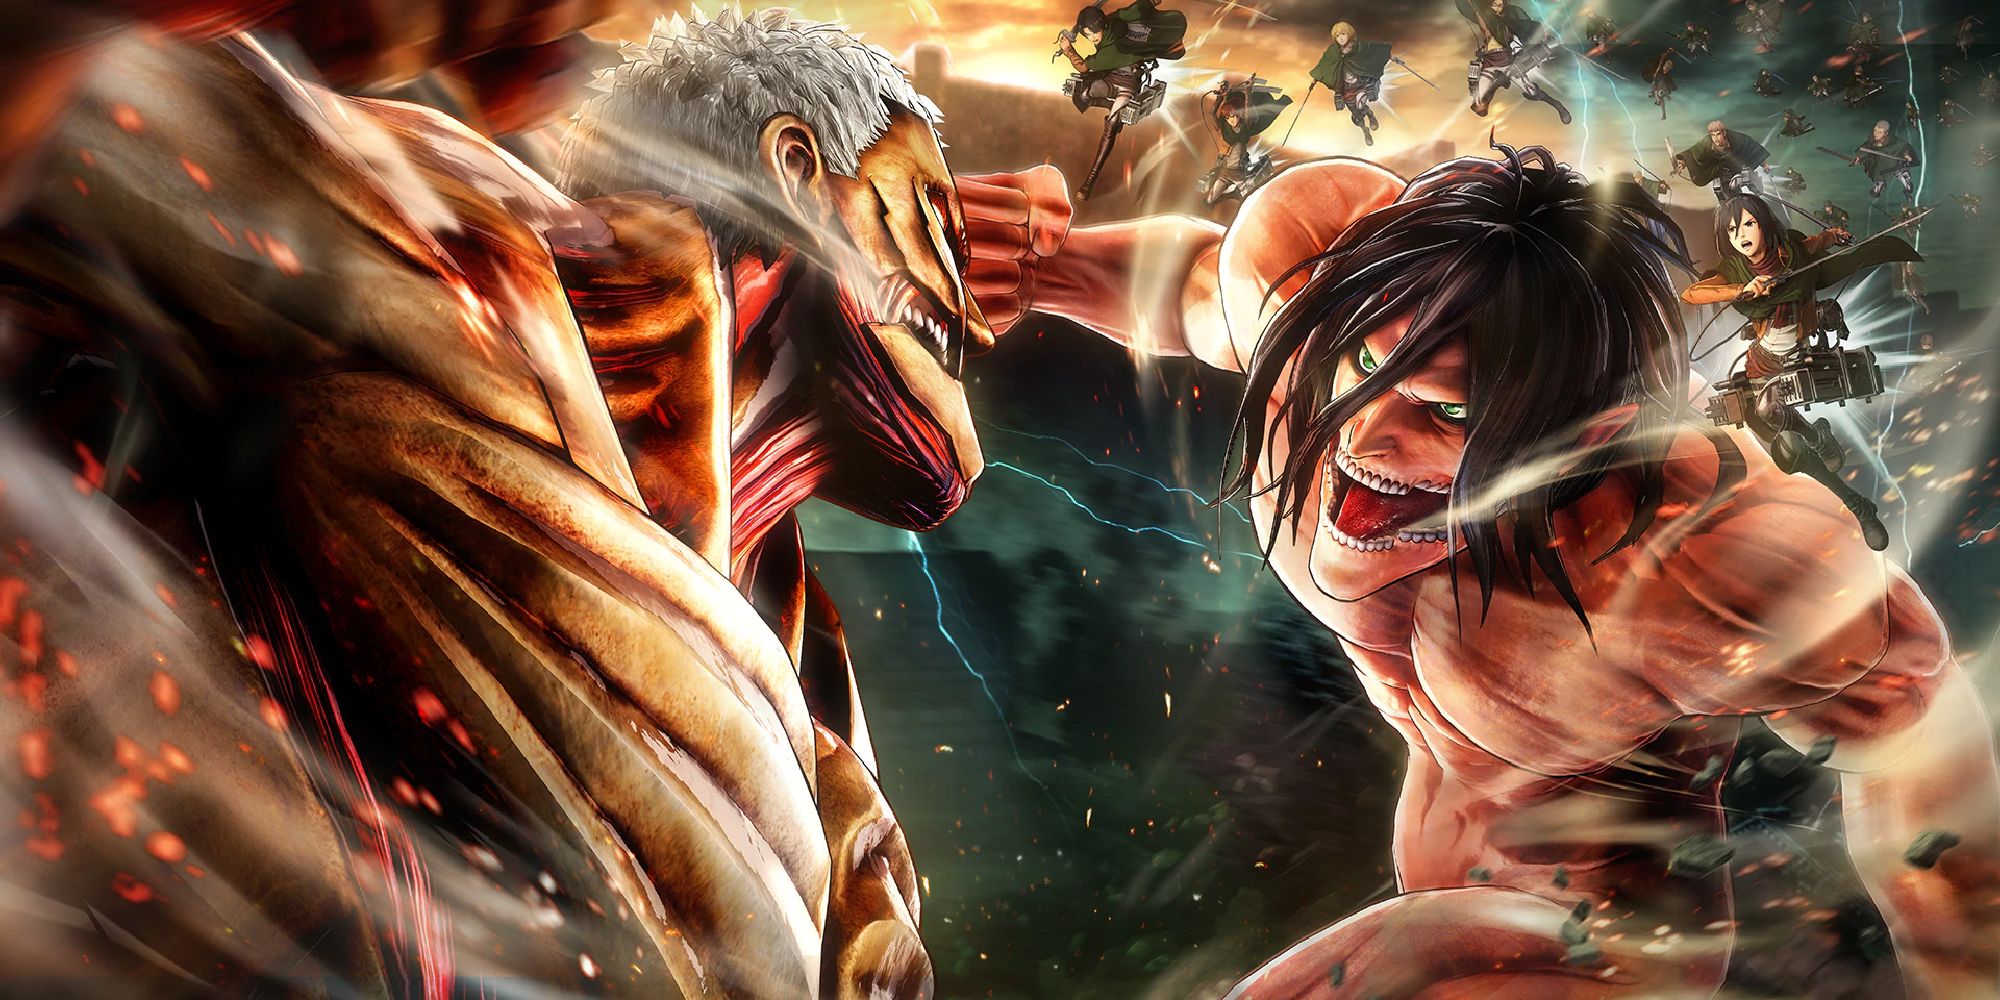 Eren punching a giant Titan in Attack on Titan